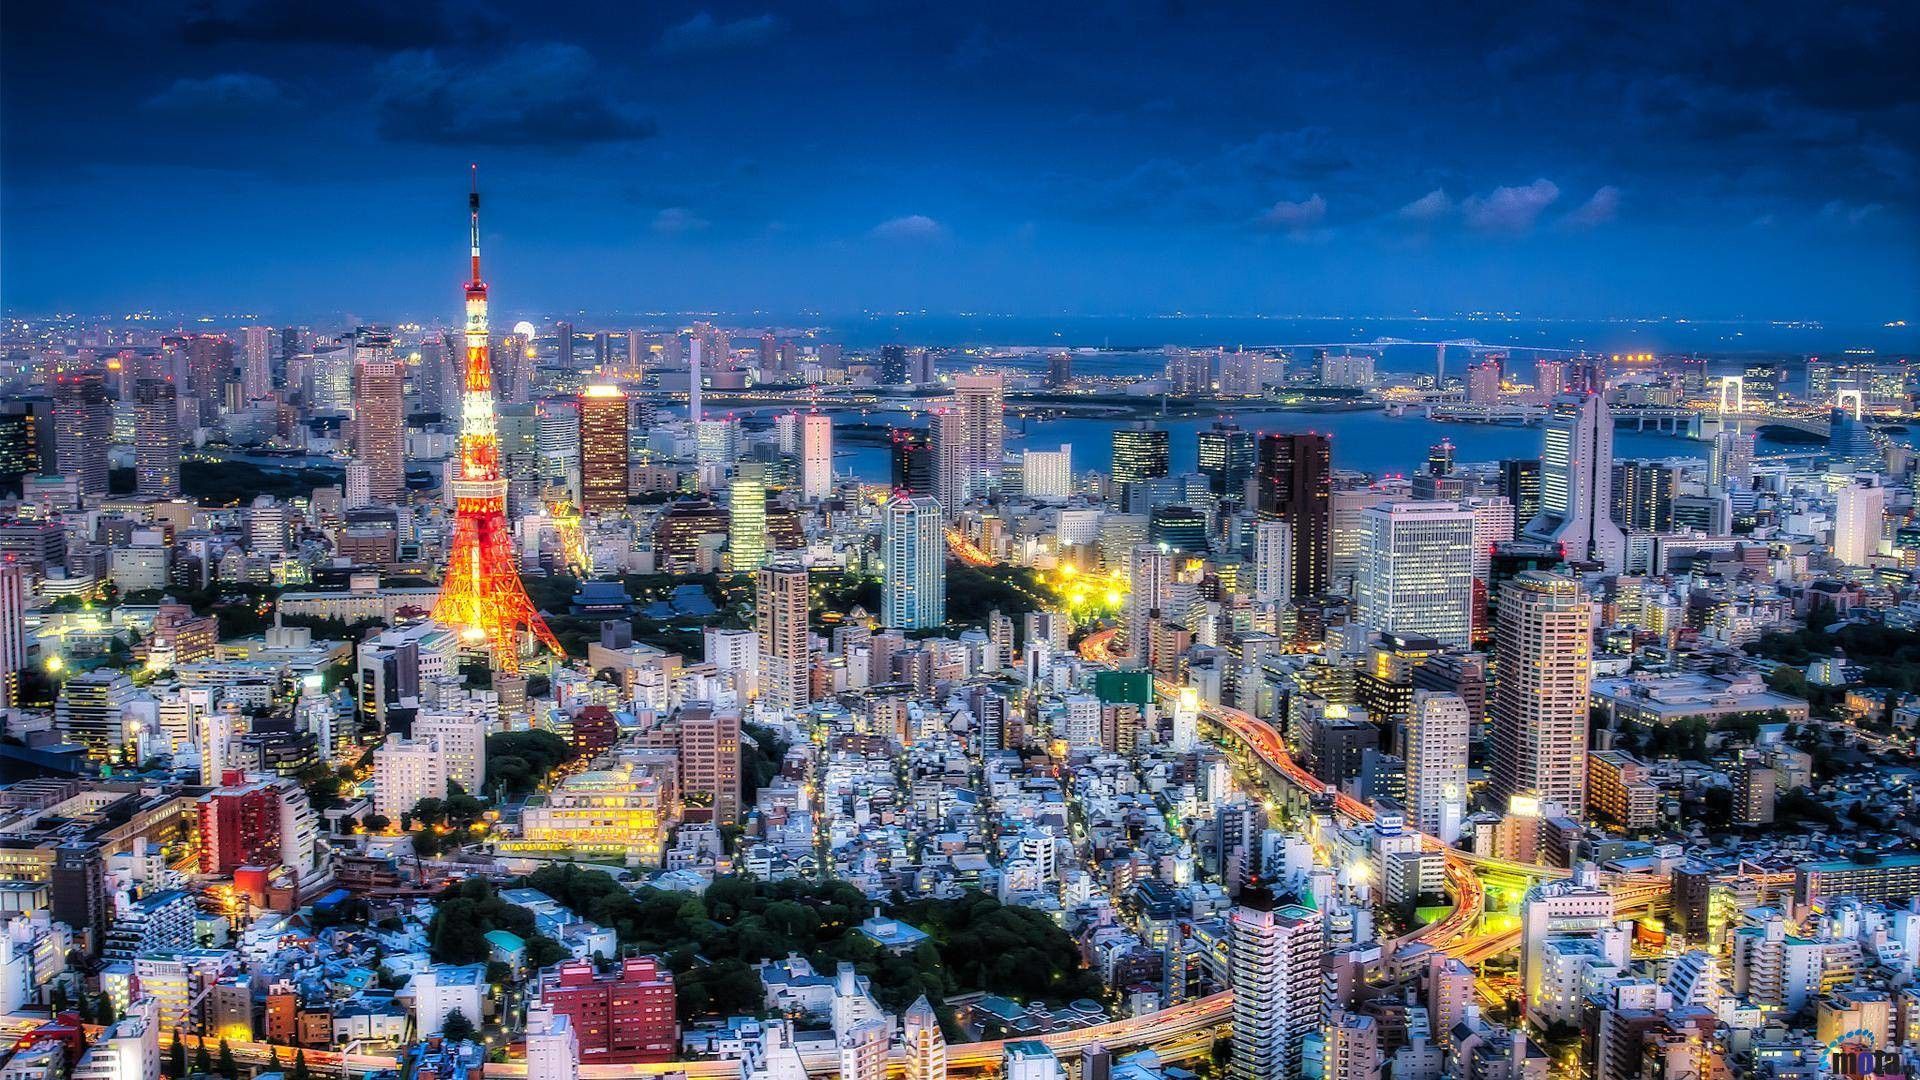 HD wallpaper images Of Tokyo japan Anime City tokyo Japan City   Wallpaper Flare